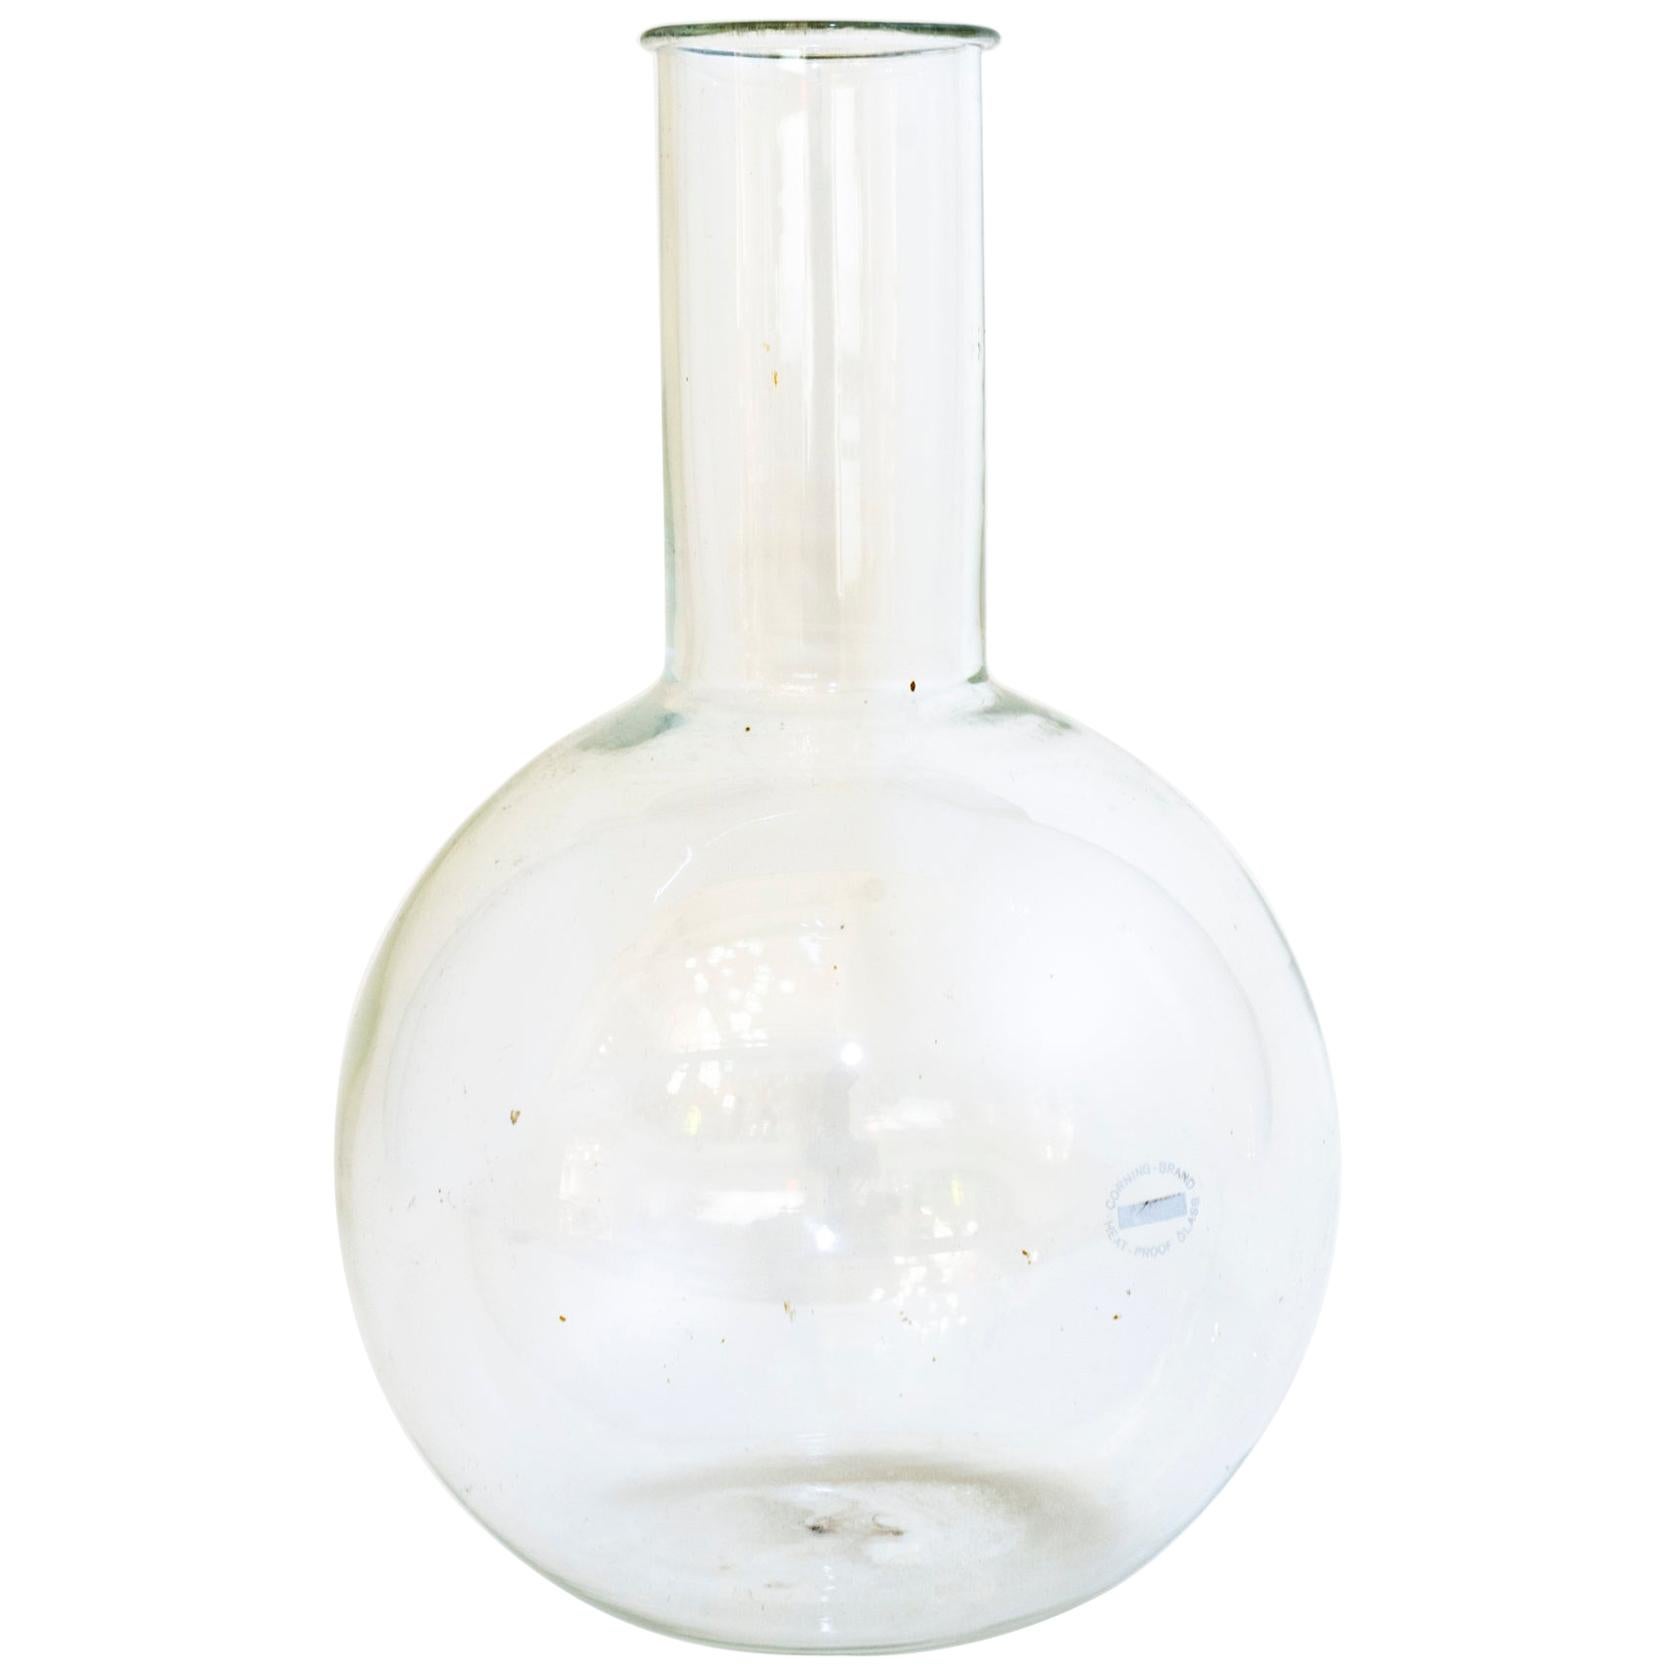 Boiling Flask in Glass, circa 1930s-1960s